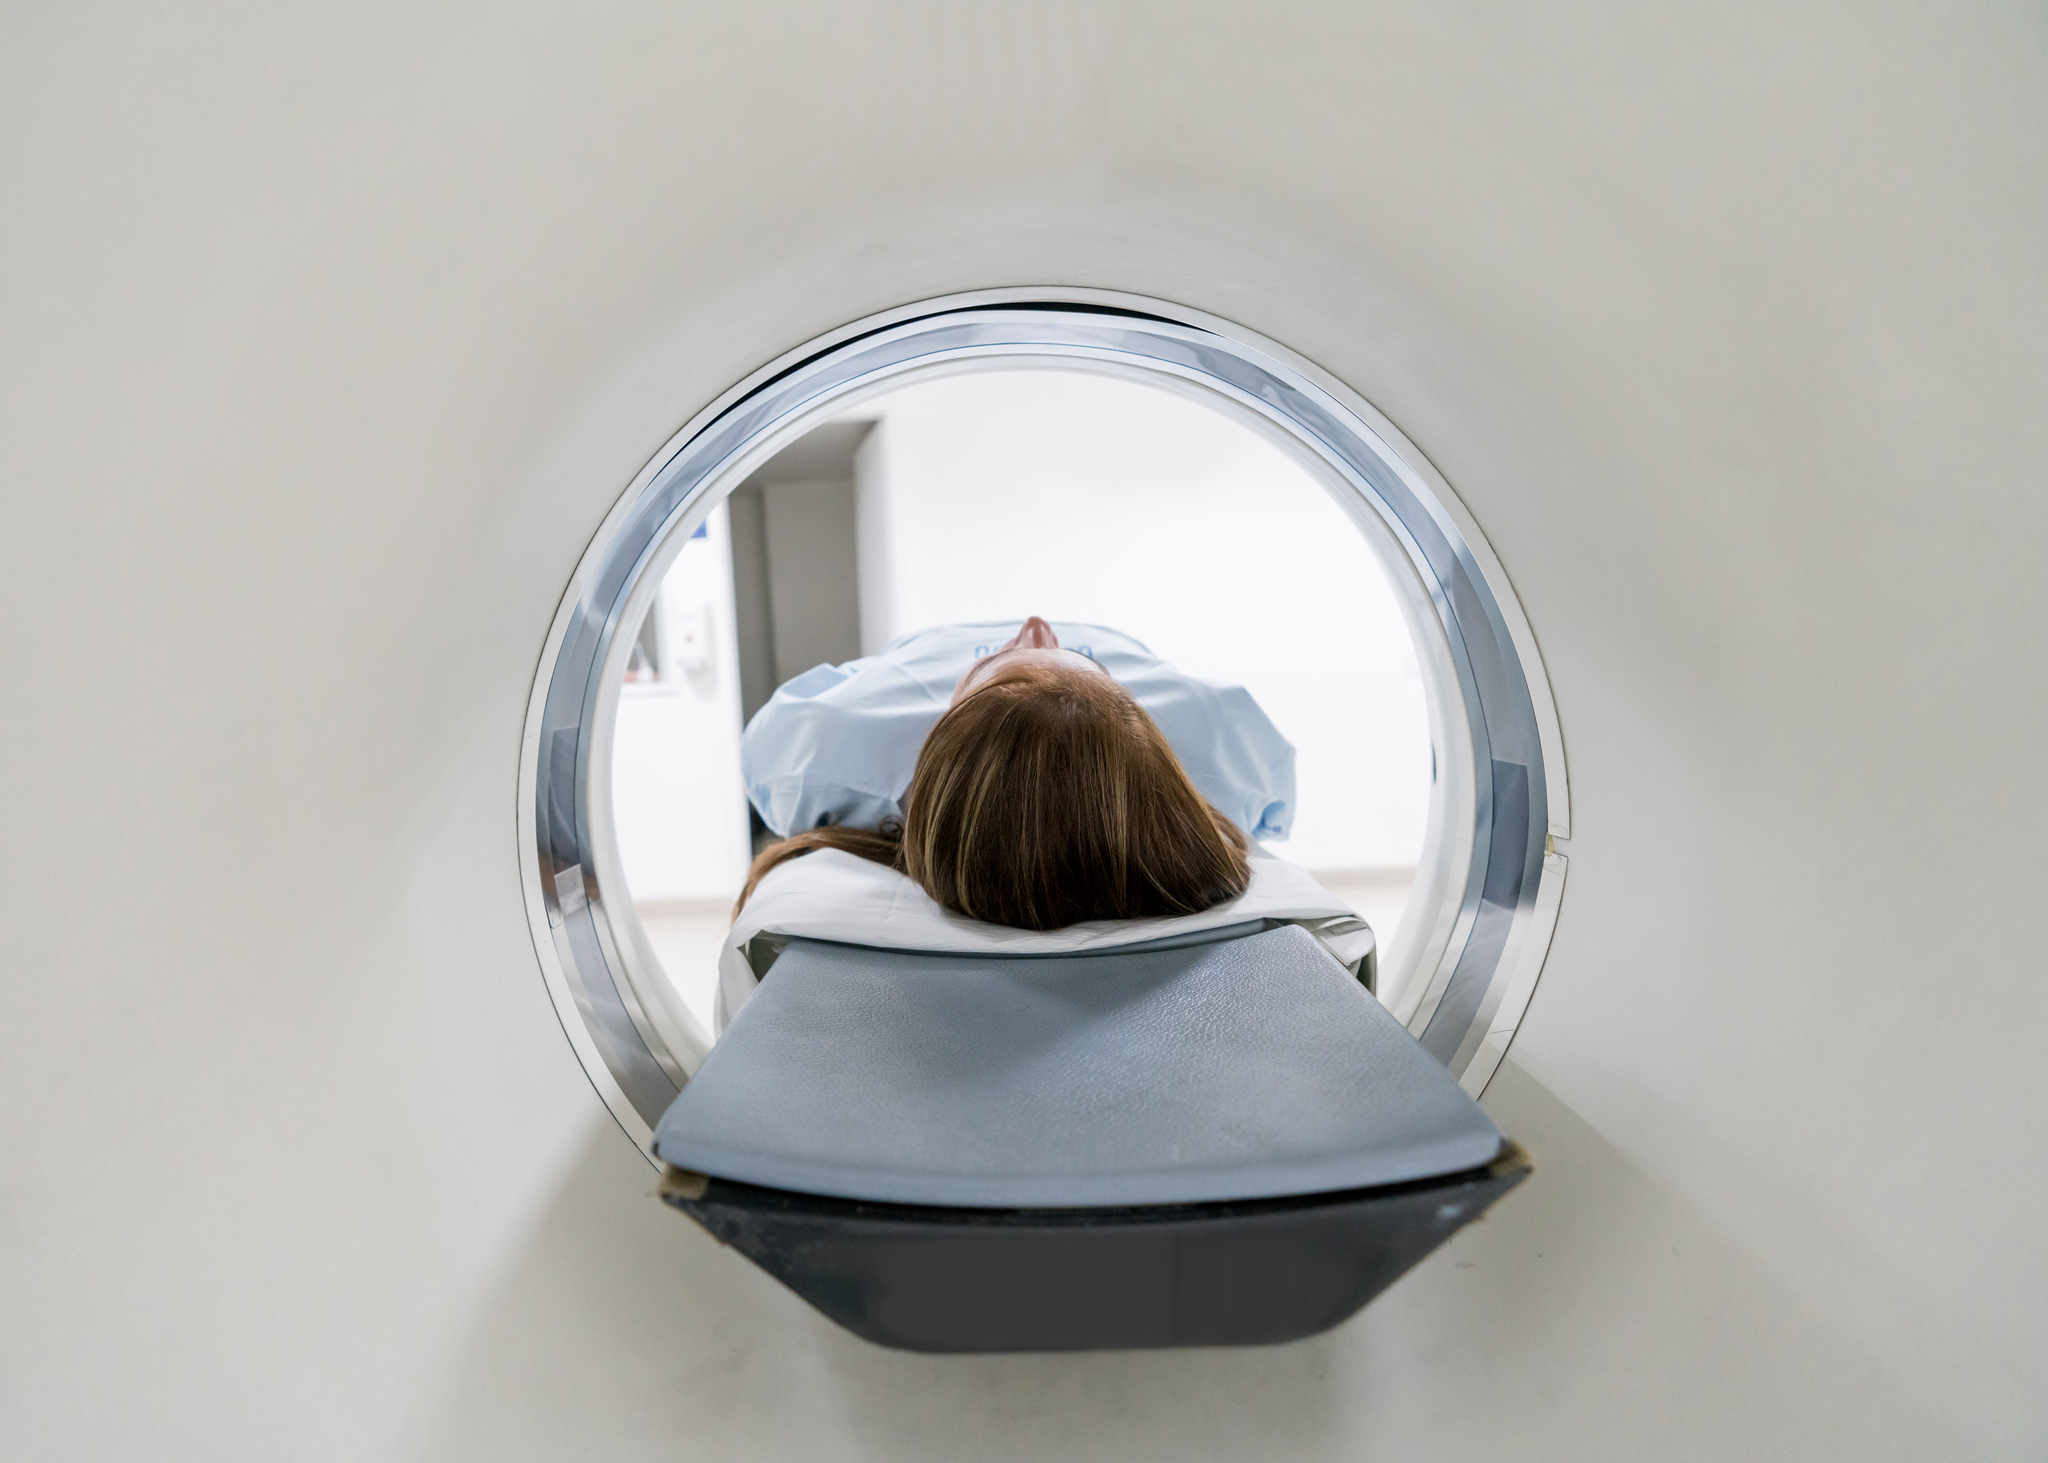 Female patient lying down for an MRI exam